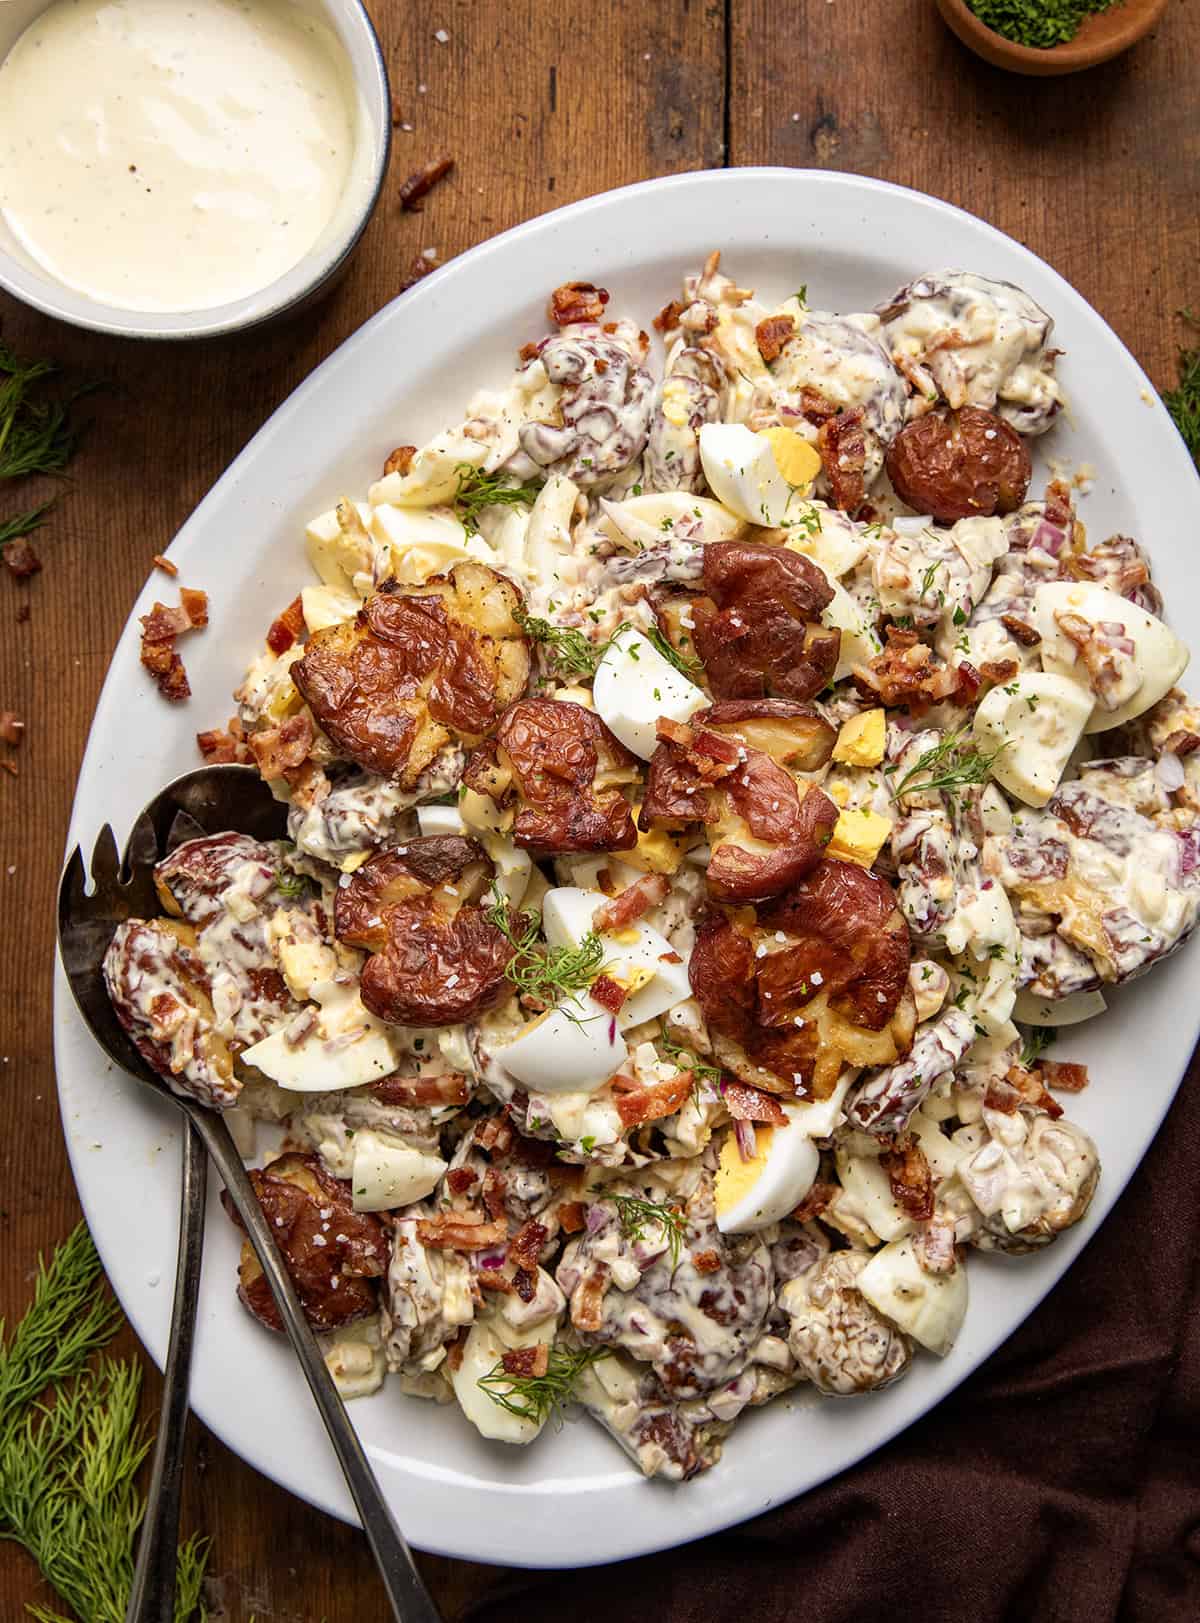 Platter of Smashed Potato Salad on a wooden table showing the smashed potatoes, hard boiled eggs, crispy bacon bits, finely diced onion, and perfect dressing that brings it all together.